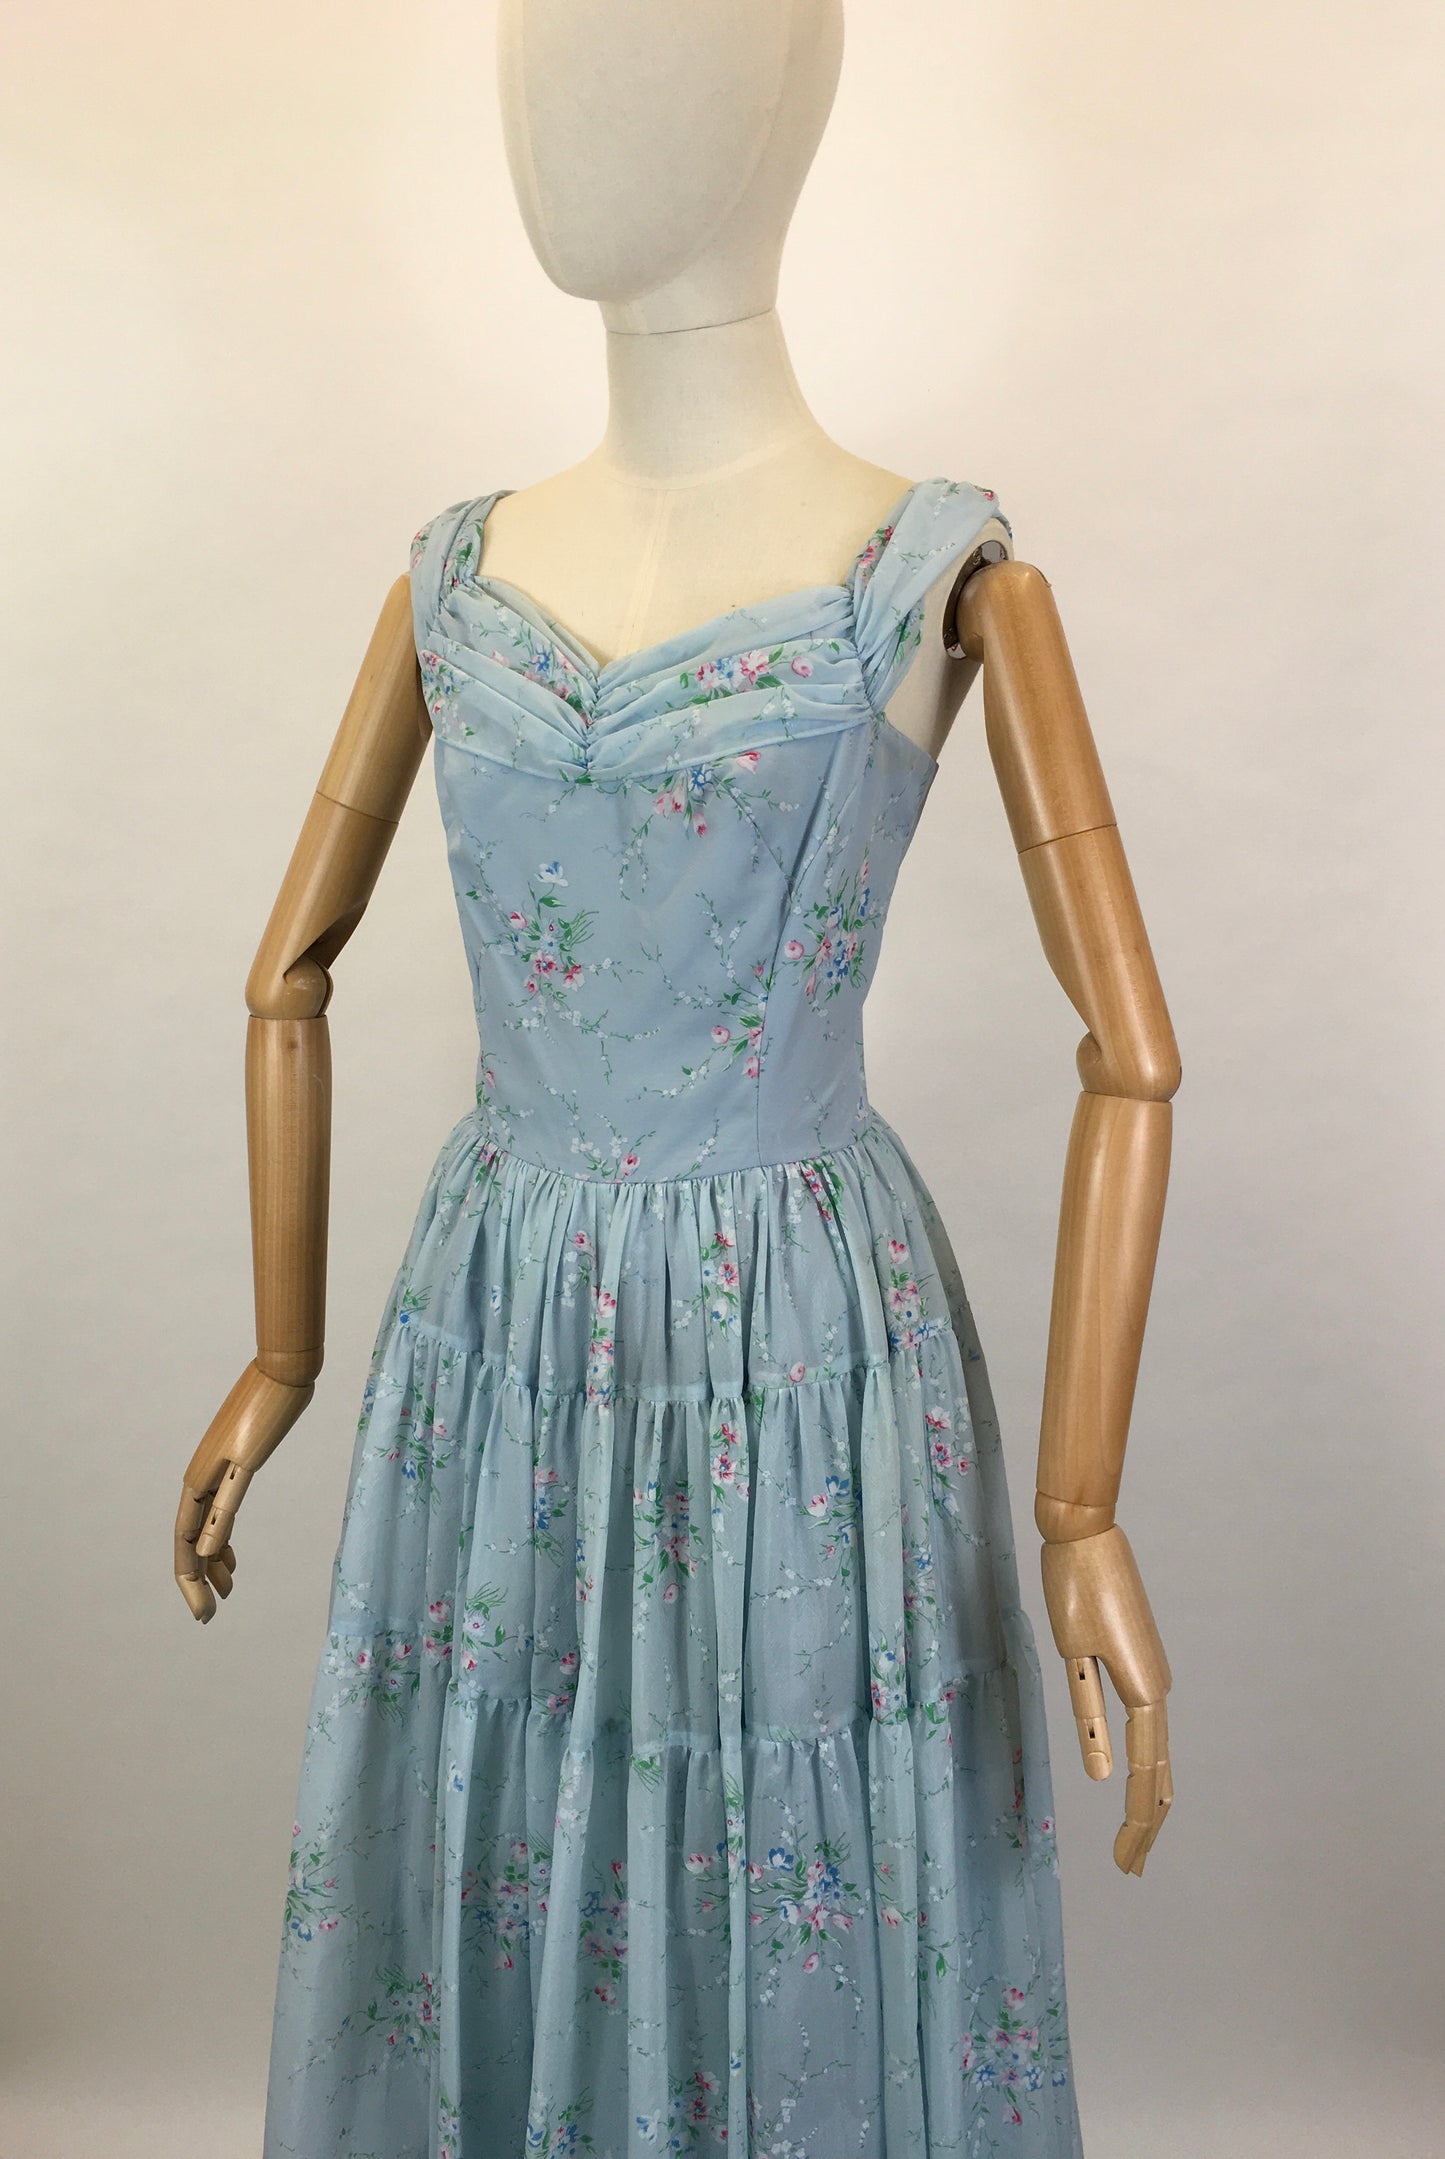 Original 1950’s Darling Full Length Prom Dress - In A Lovely Powder Blue Floral Tulle.